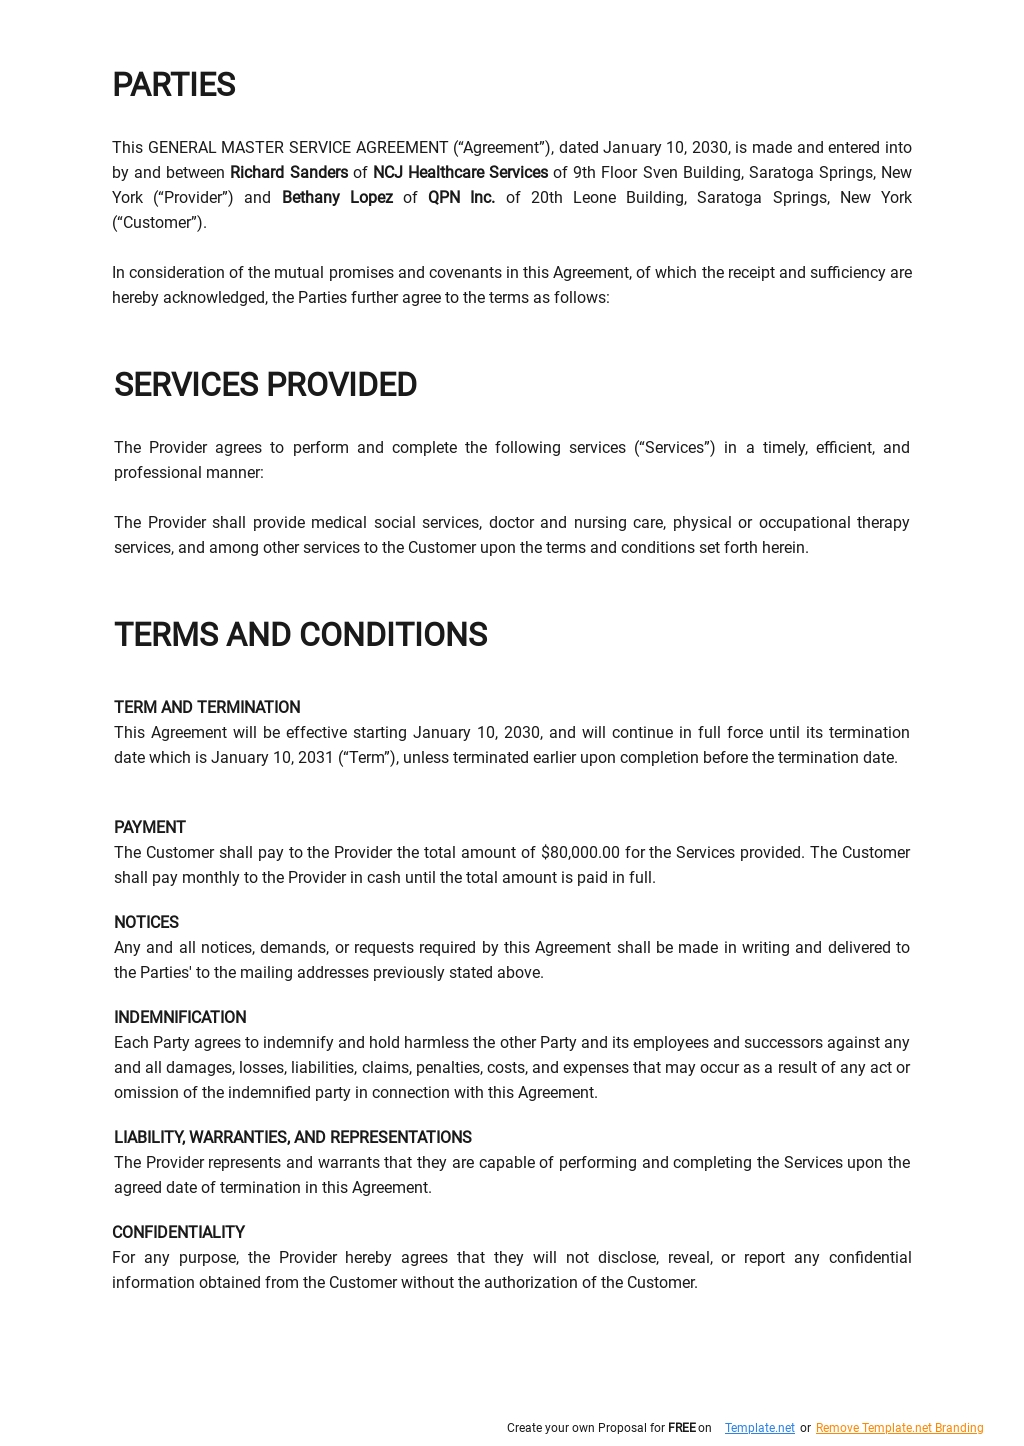 General Master Service Agreement Template 1.jpe